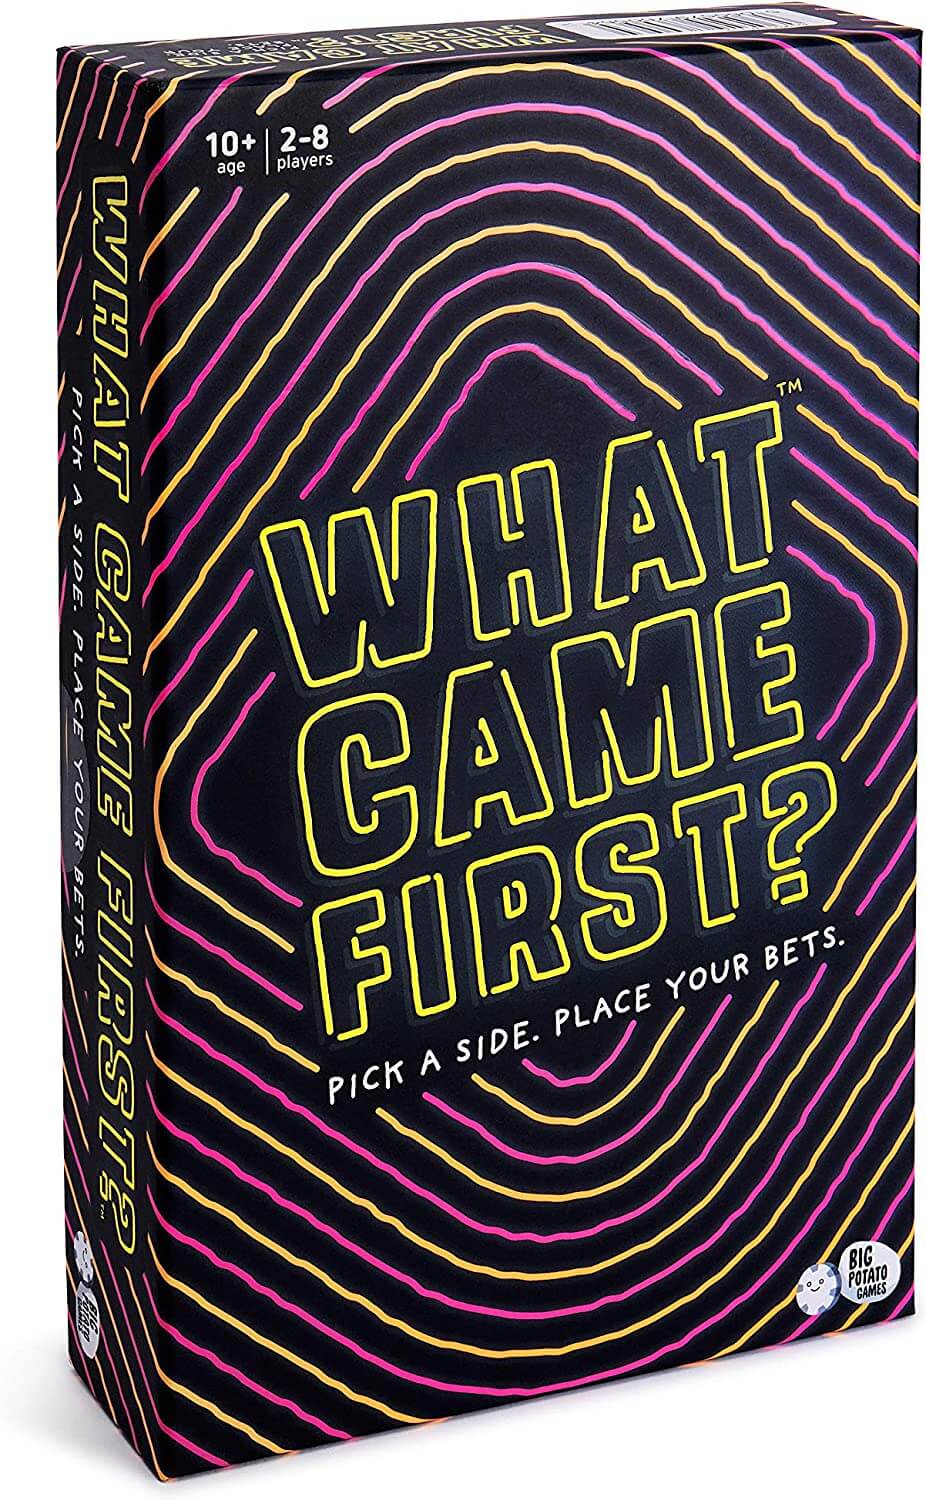 What Came First? Trivia Game